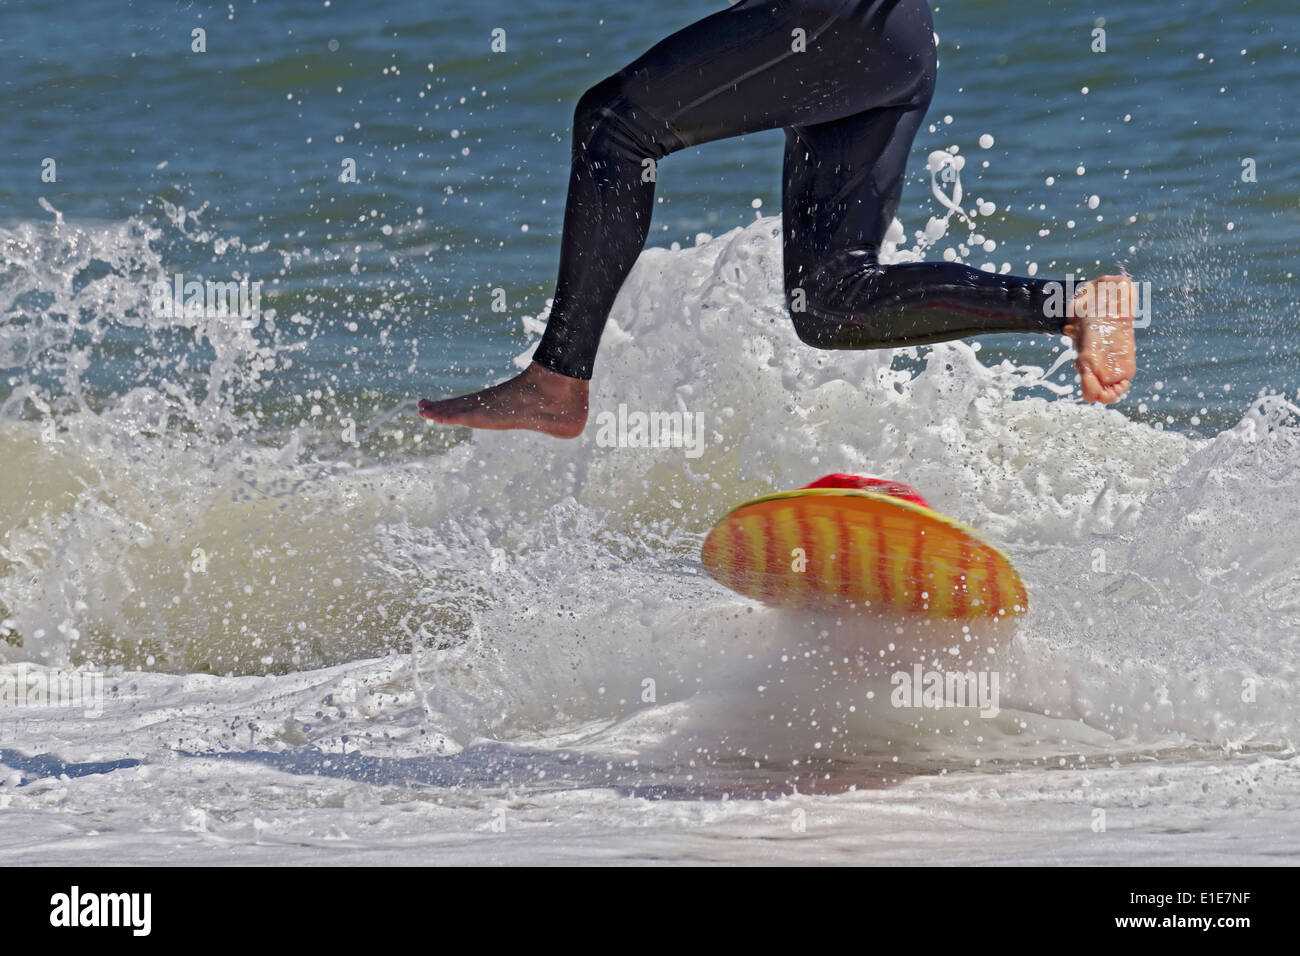 Skimboarder Wearing Wetsuit Jumping Into Wave Stock Photo